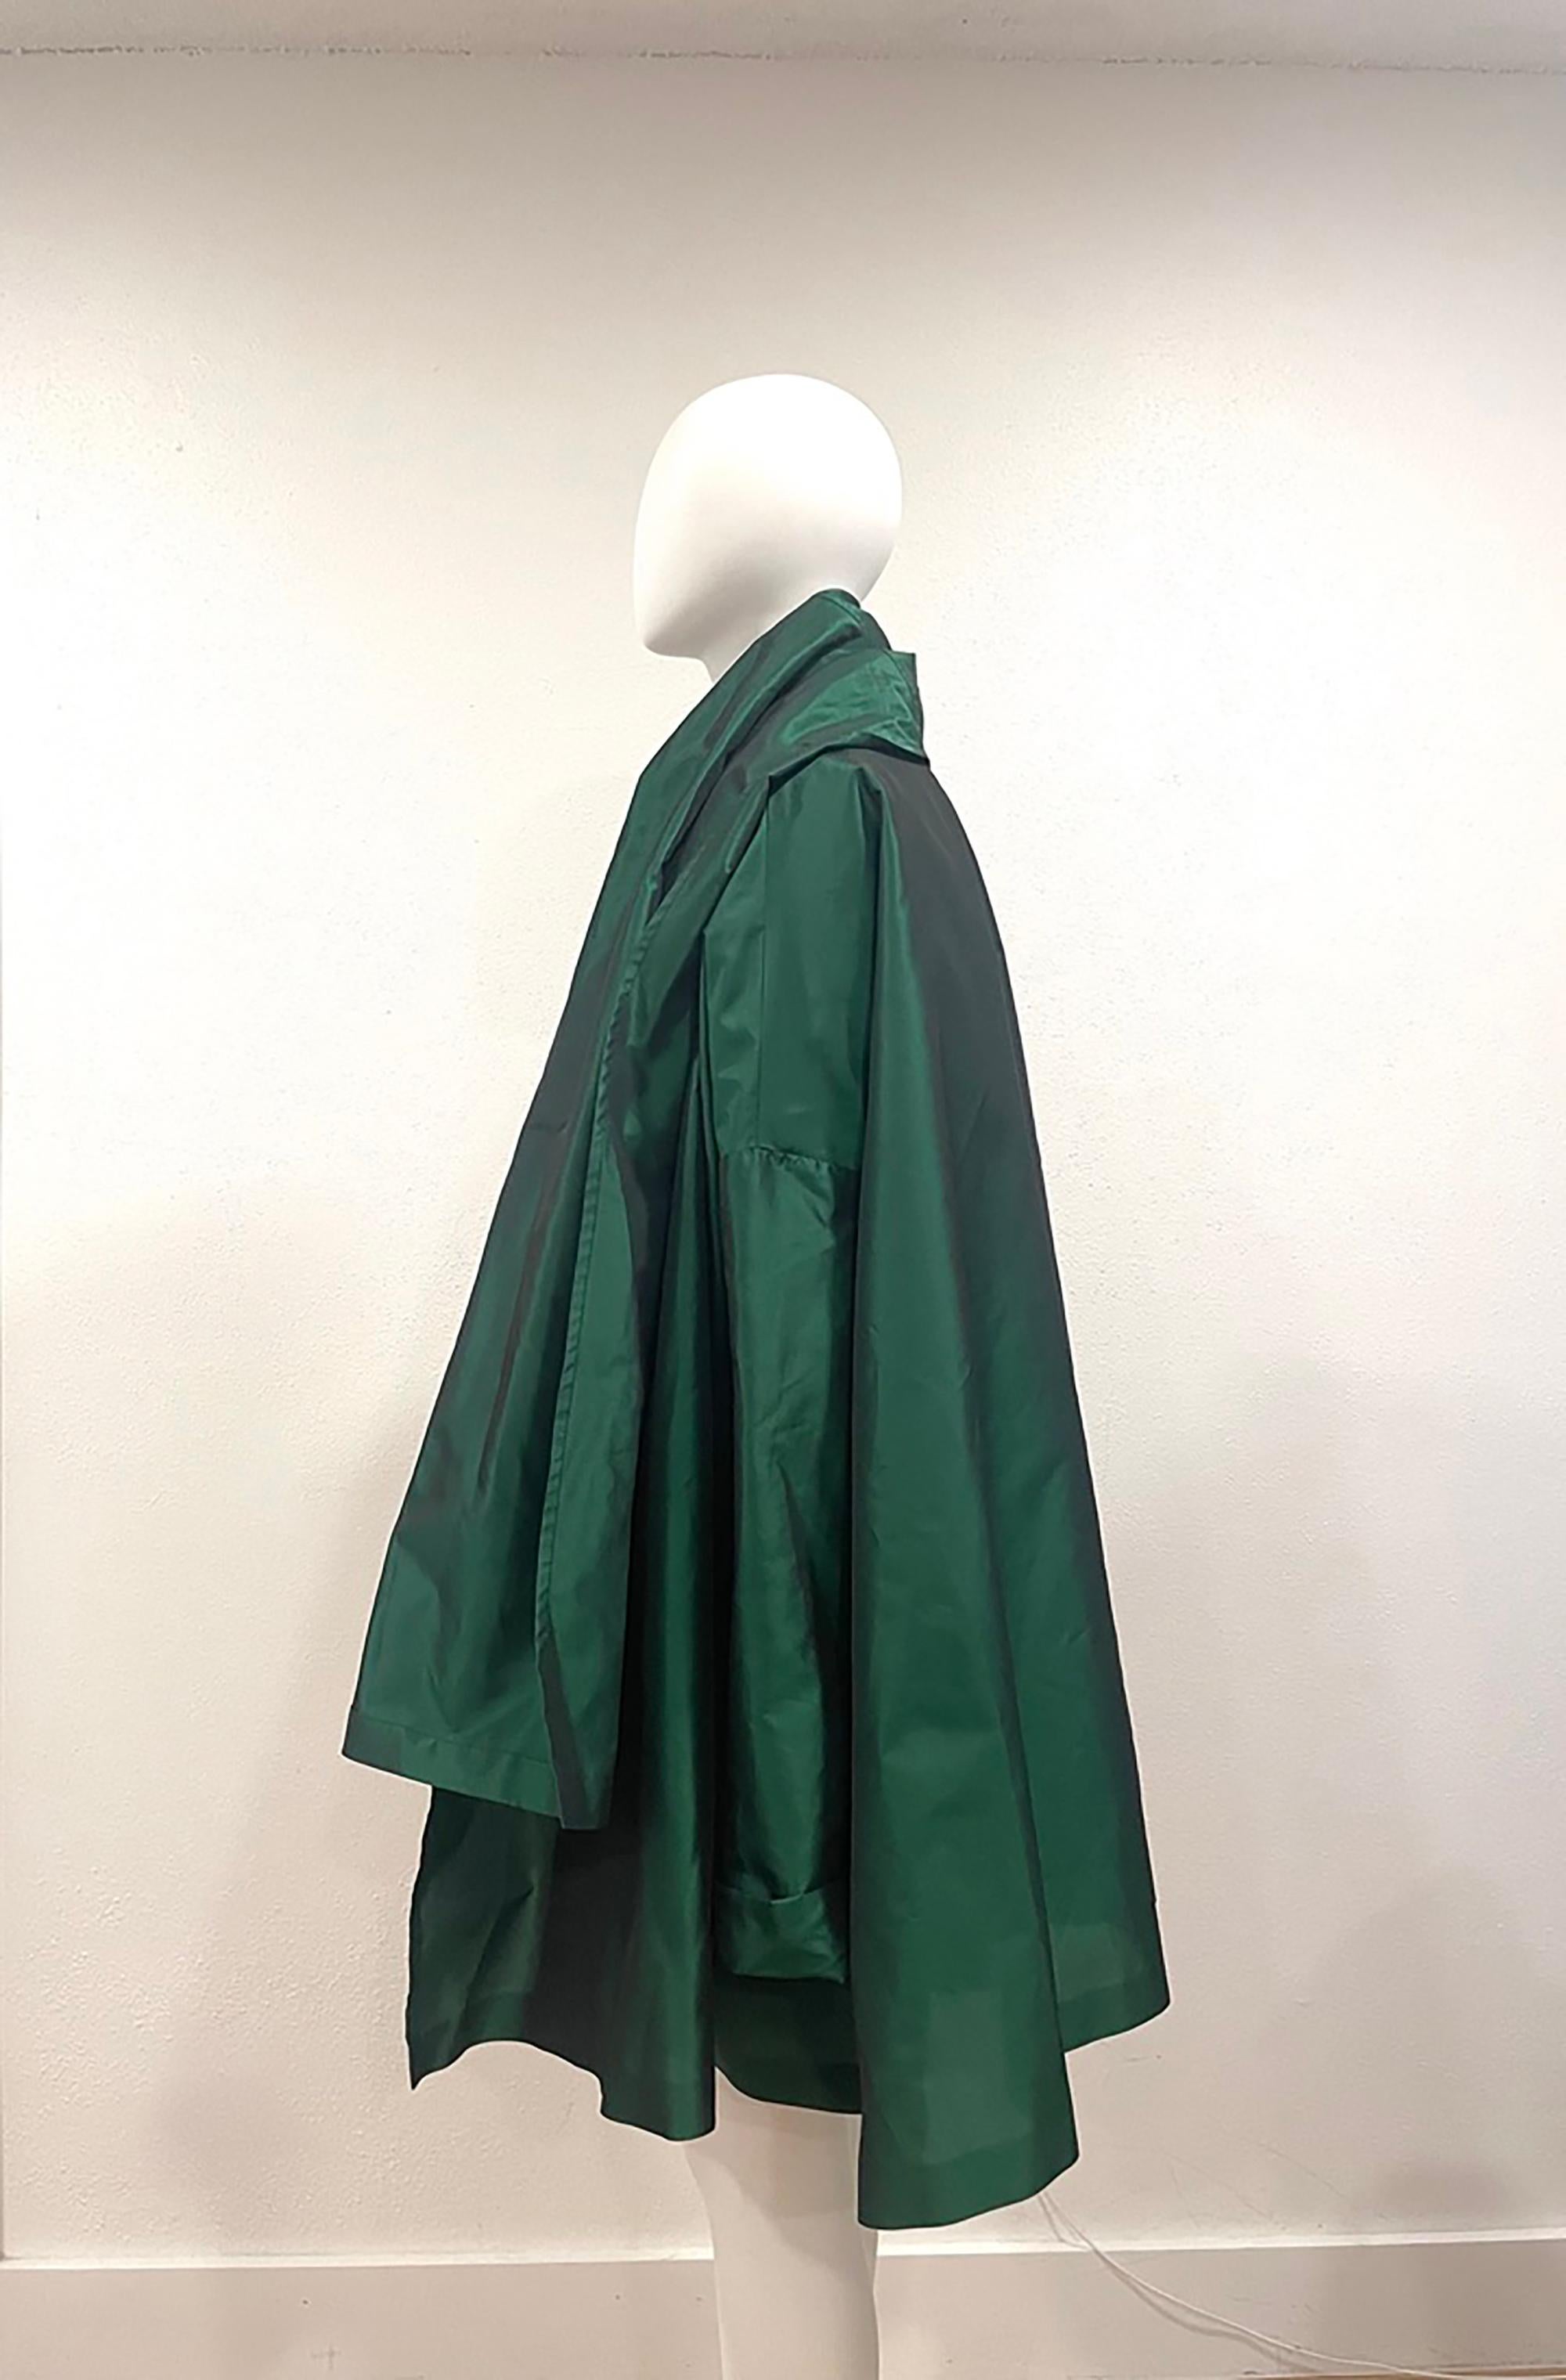 1991 DOLCE & GABBANA Emerald Green Satin Coat Dress In Excellent Condition For Sale In Austin, TX